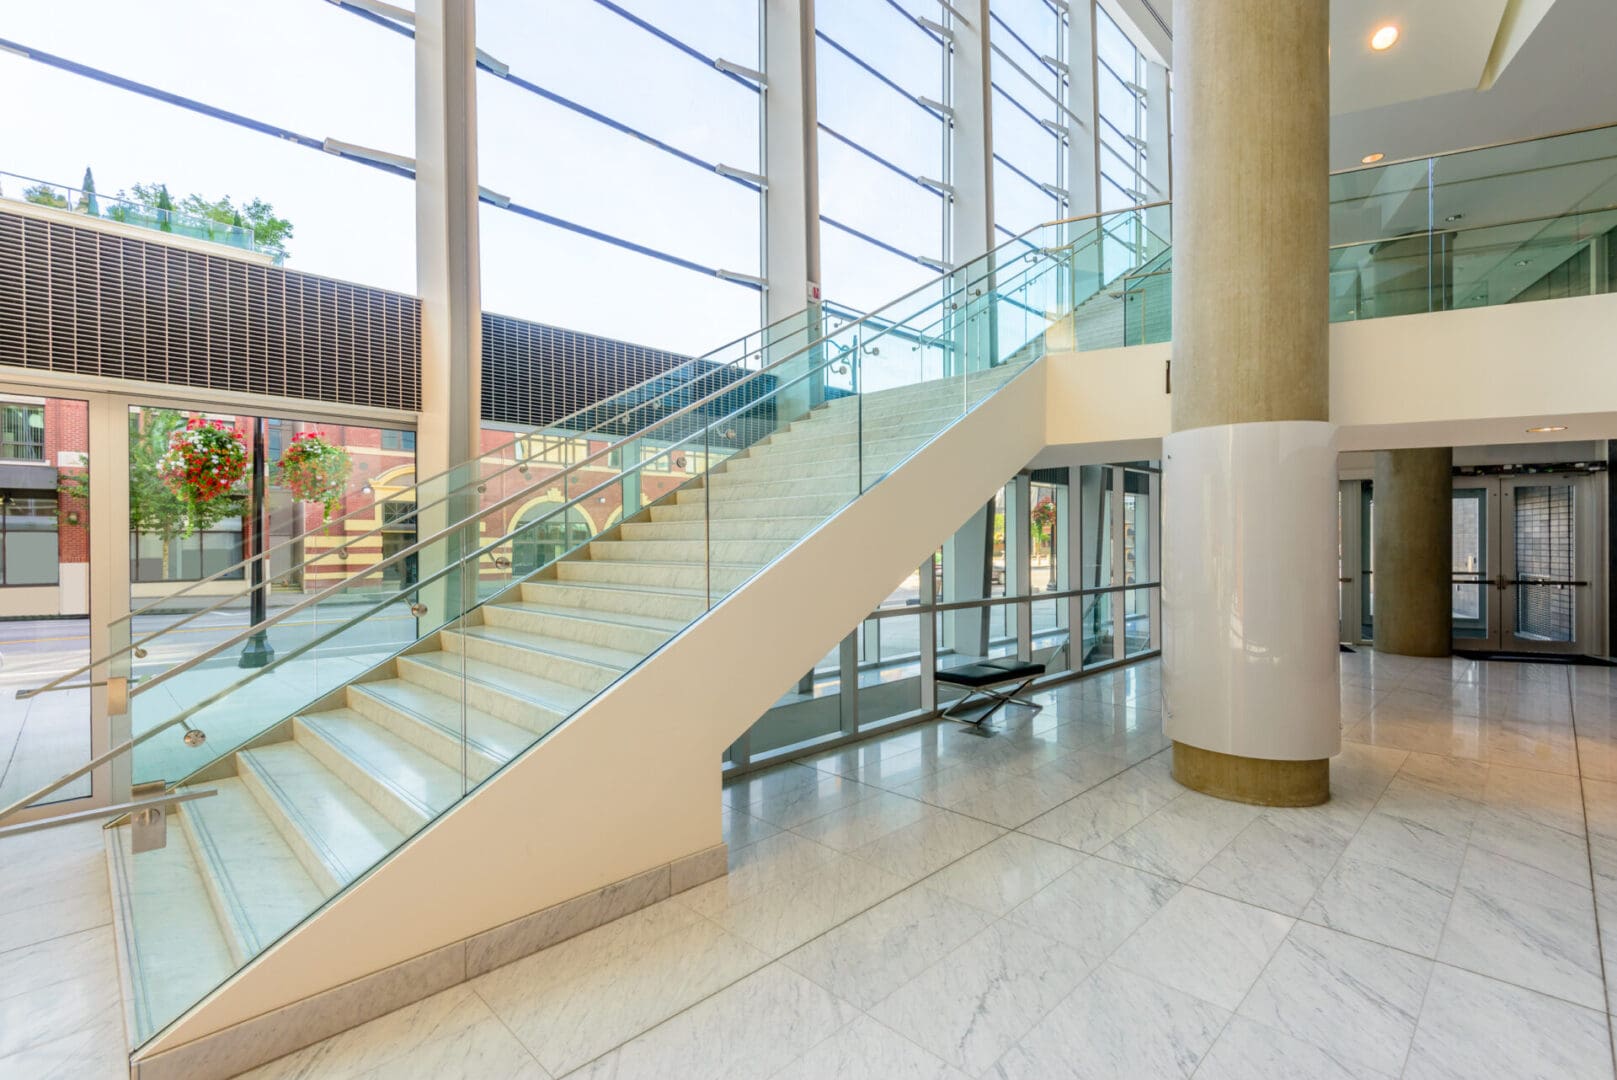 A large glass staircase in the middle of a building.